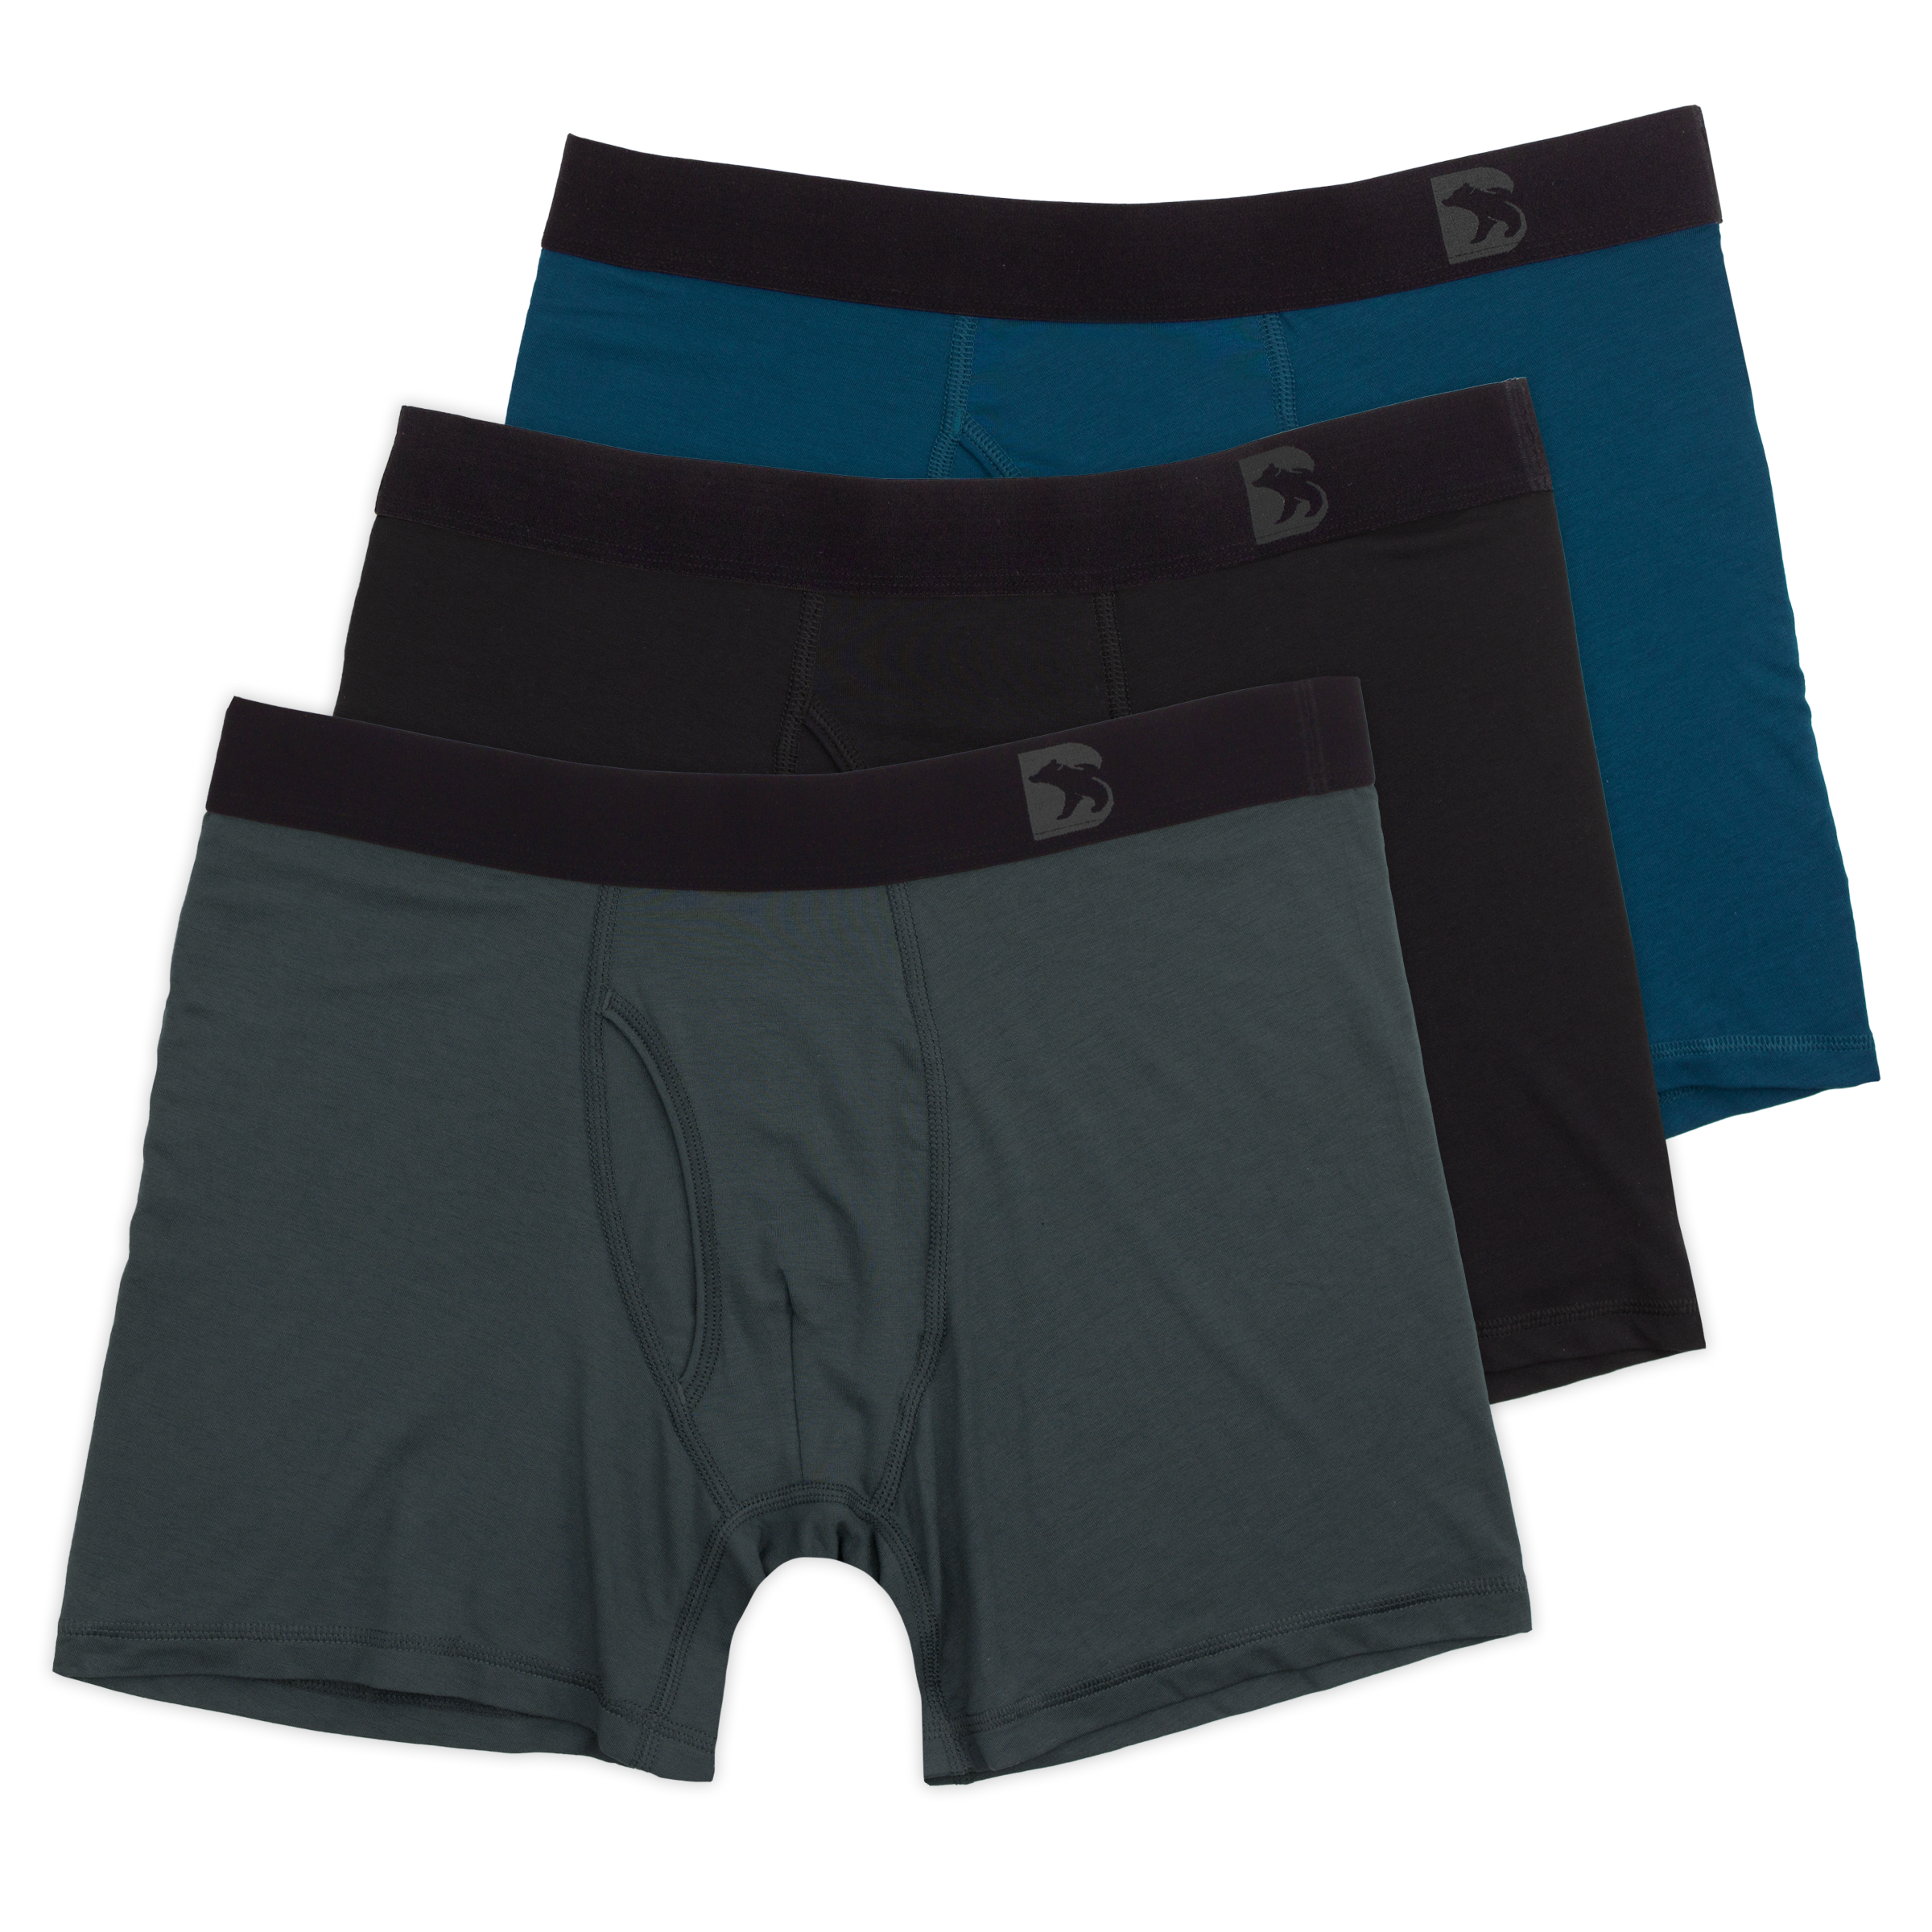 Modal Boxer Brief Classic 3 Pack in Coal grey, Ocean blue, and Black with elastic waistband with Bearbottom B logo and functional fly